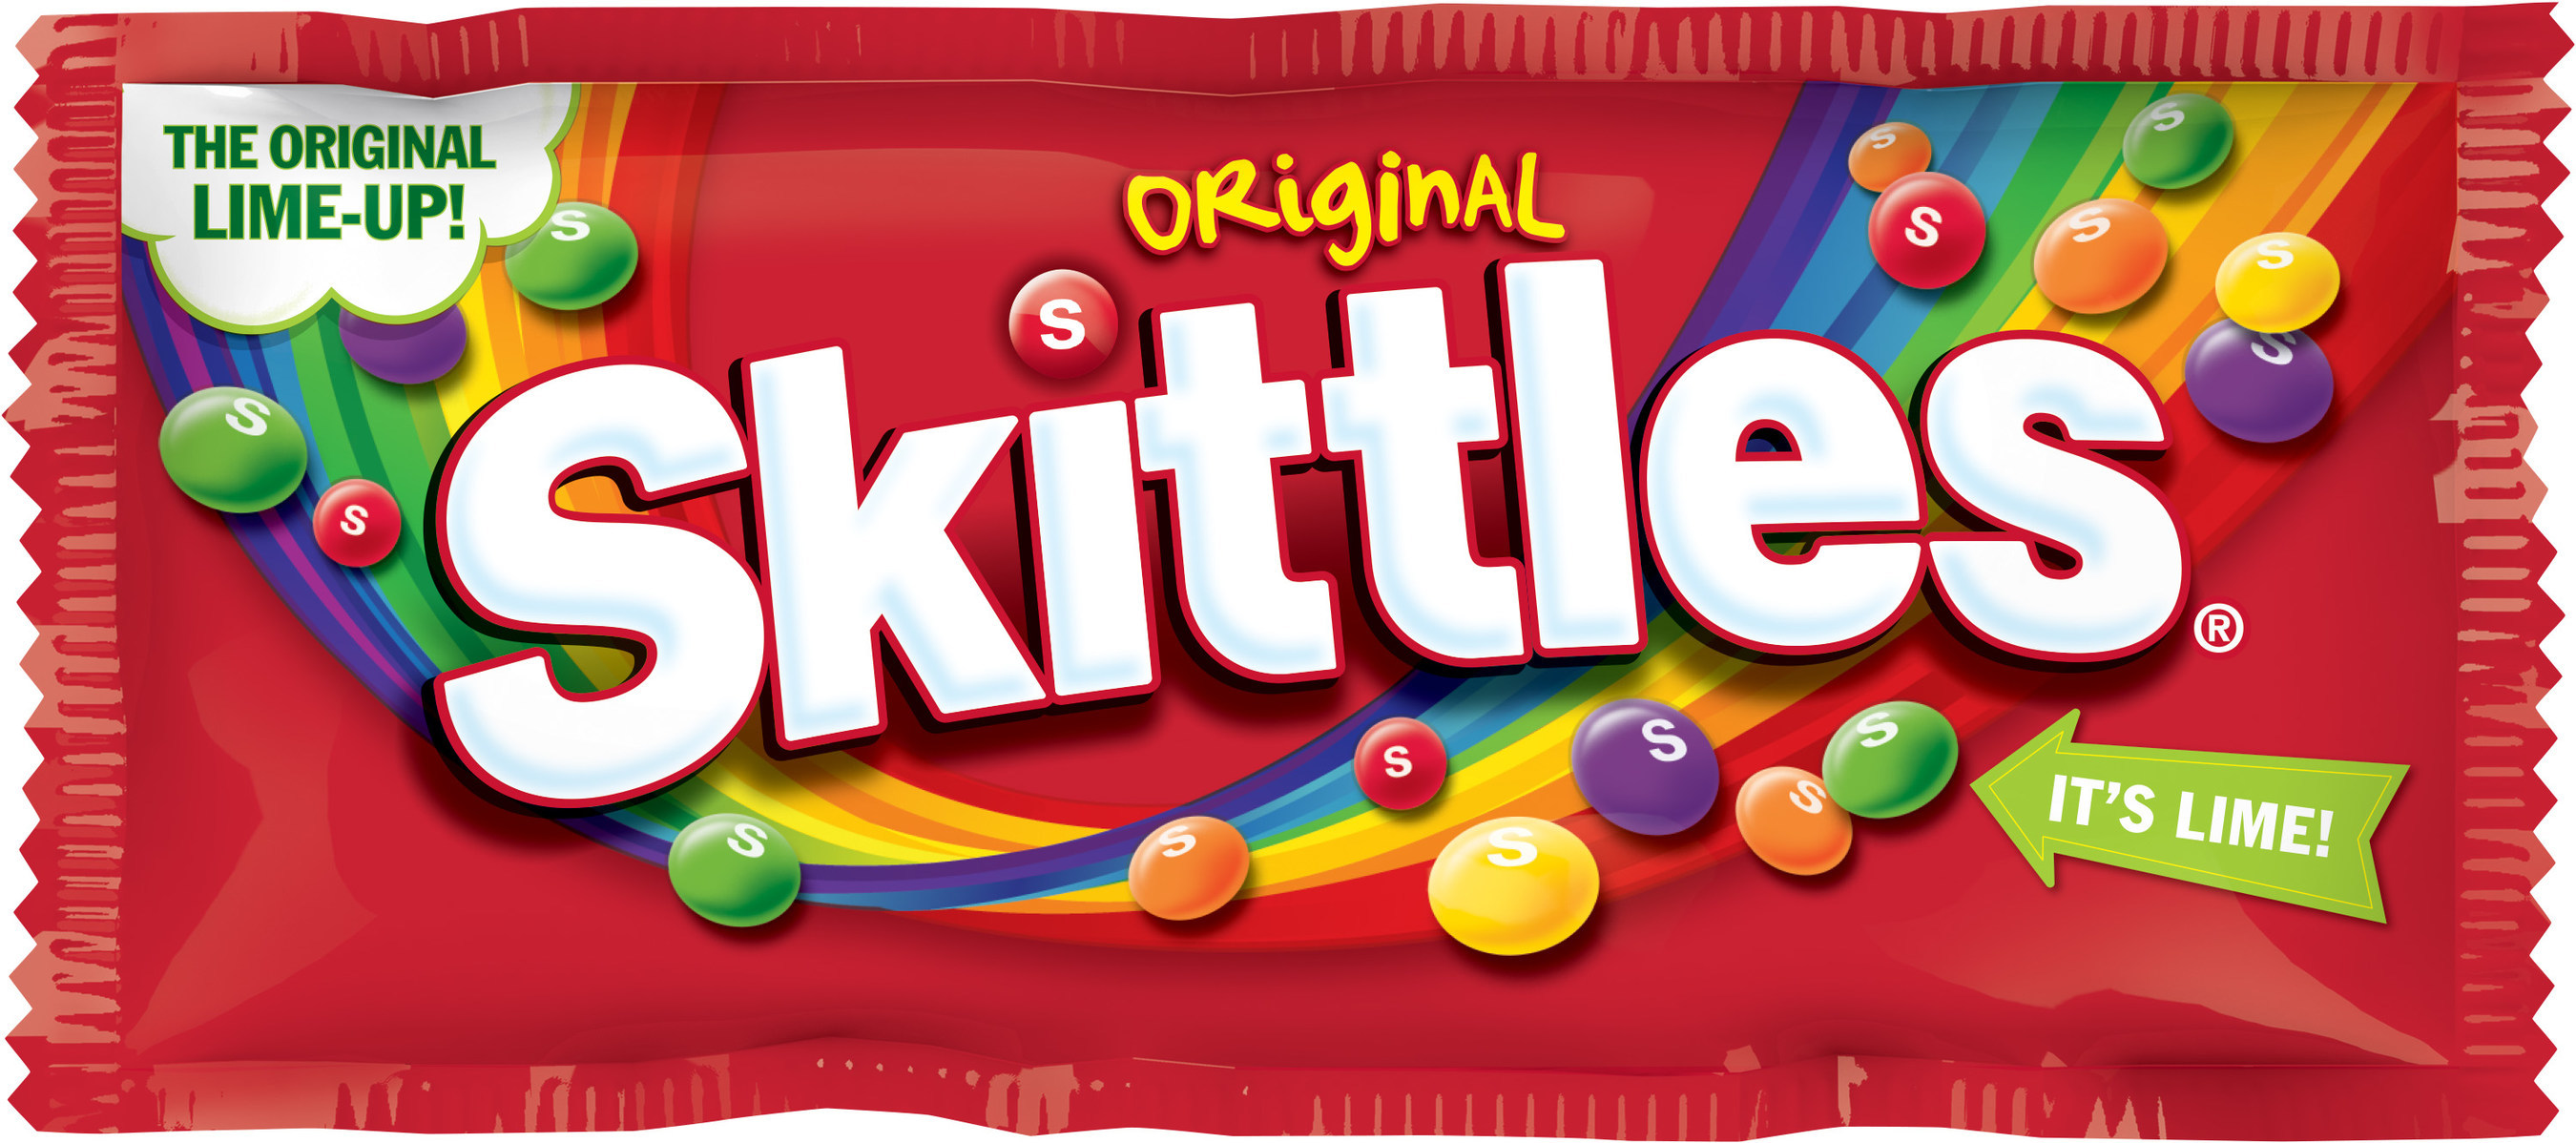 Are Skittles safe to eat? Lawsuit says chemical used makes them ‘unfit